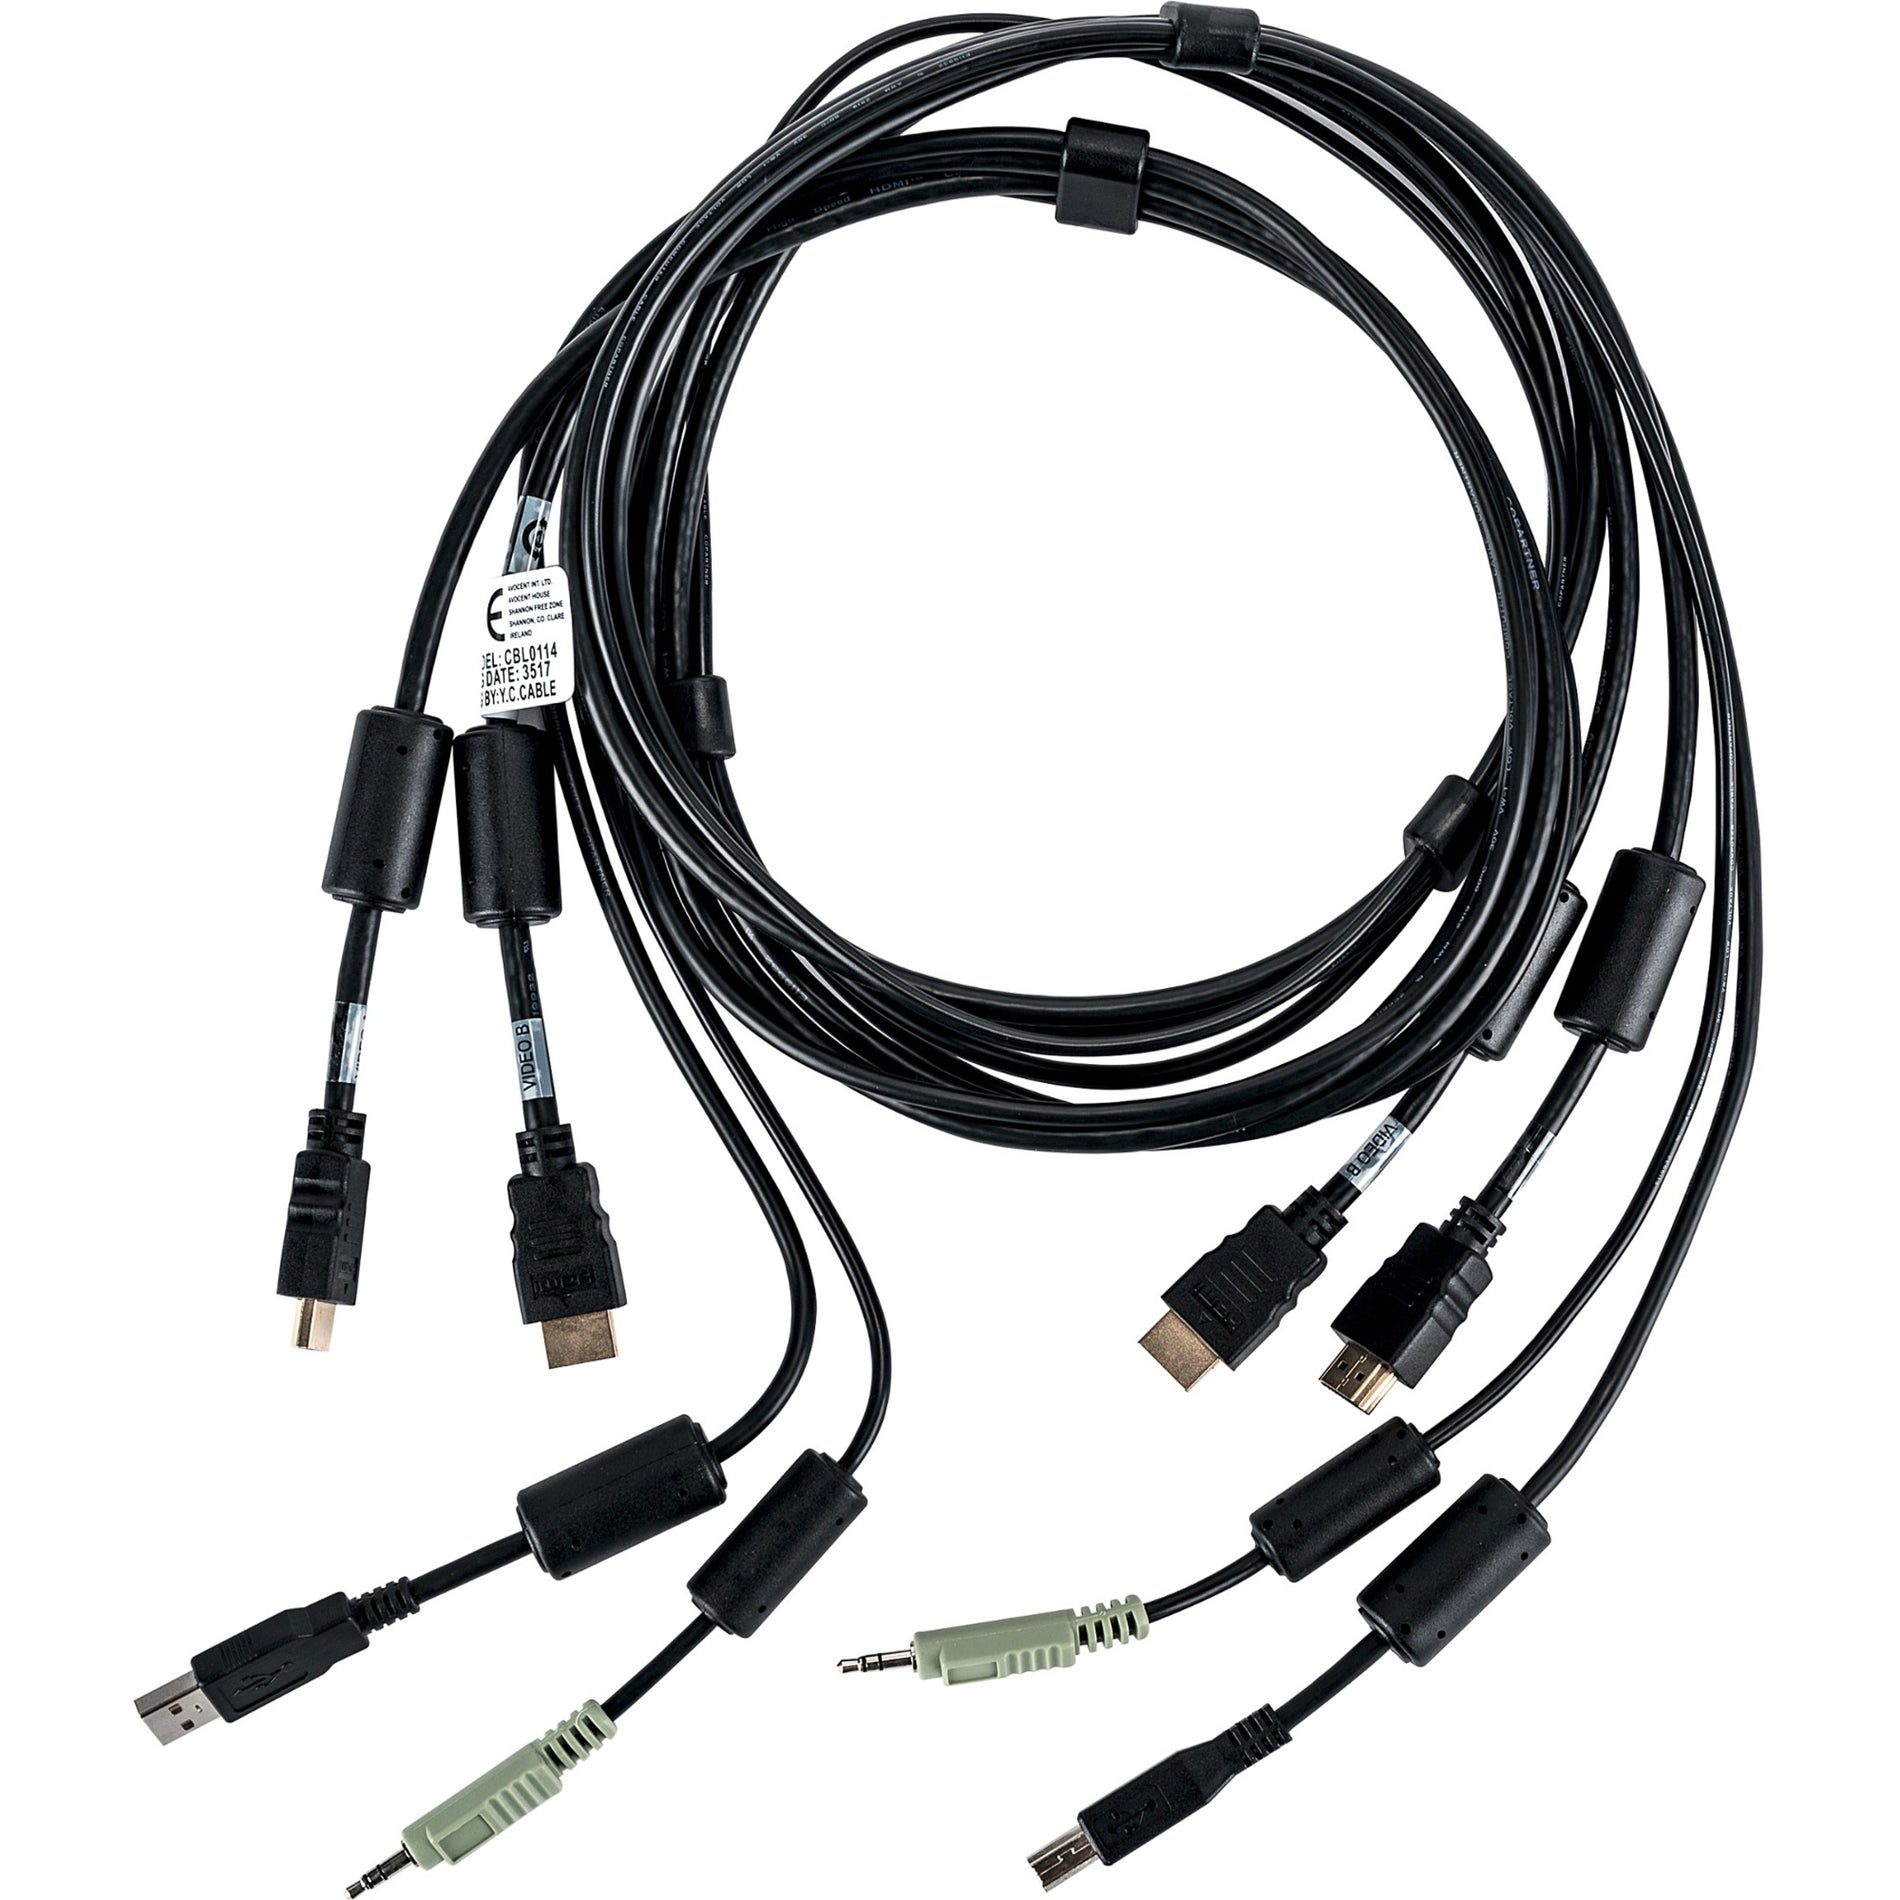 AVOCENT CBL0114 SC940H Cable - 6ft, USB Keyboard and Mouse, Dual HDMI and Audio Cable